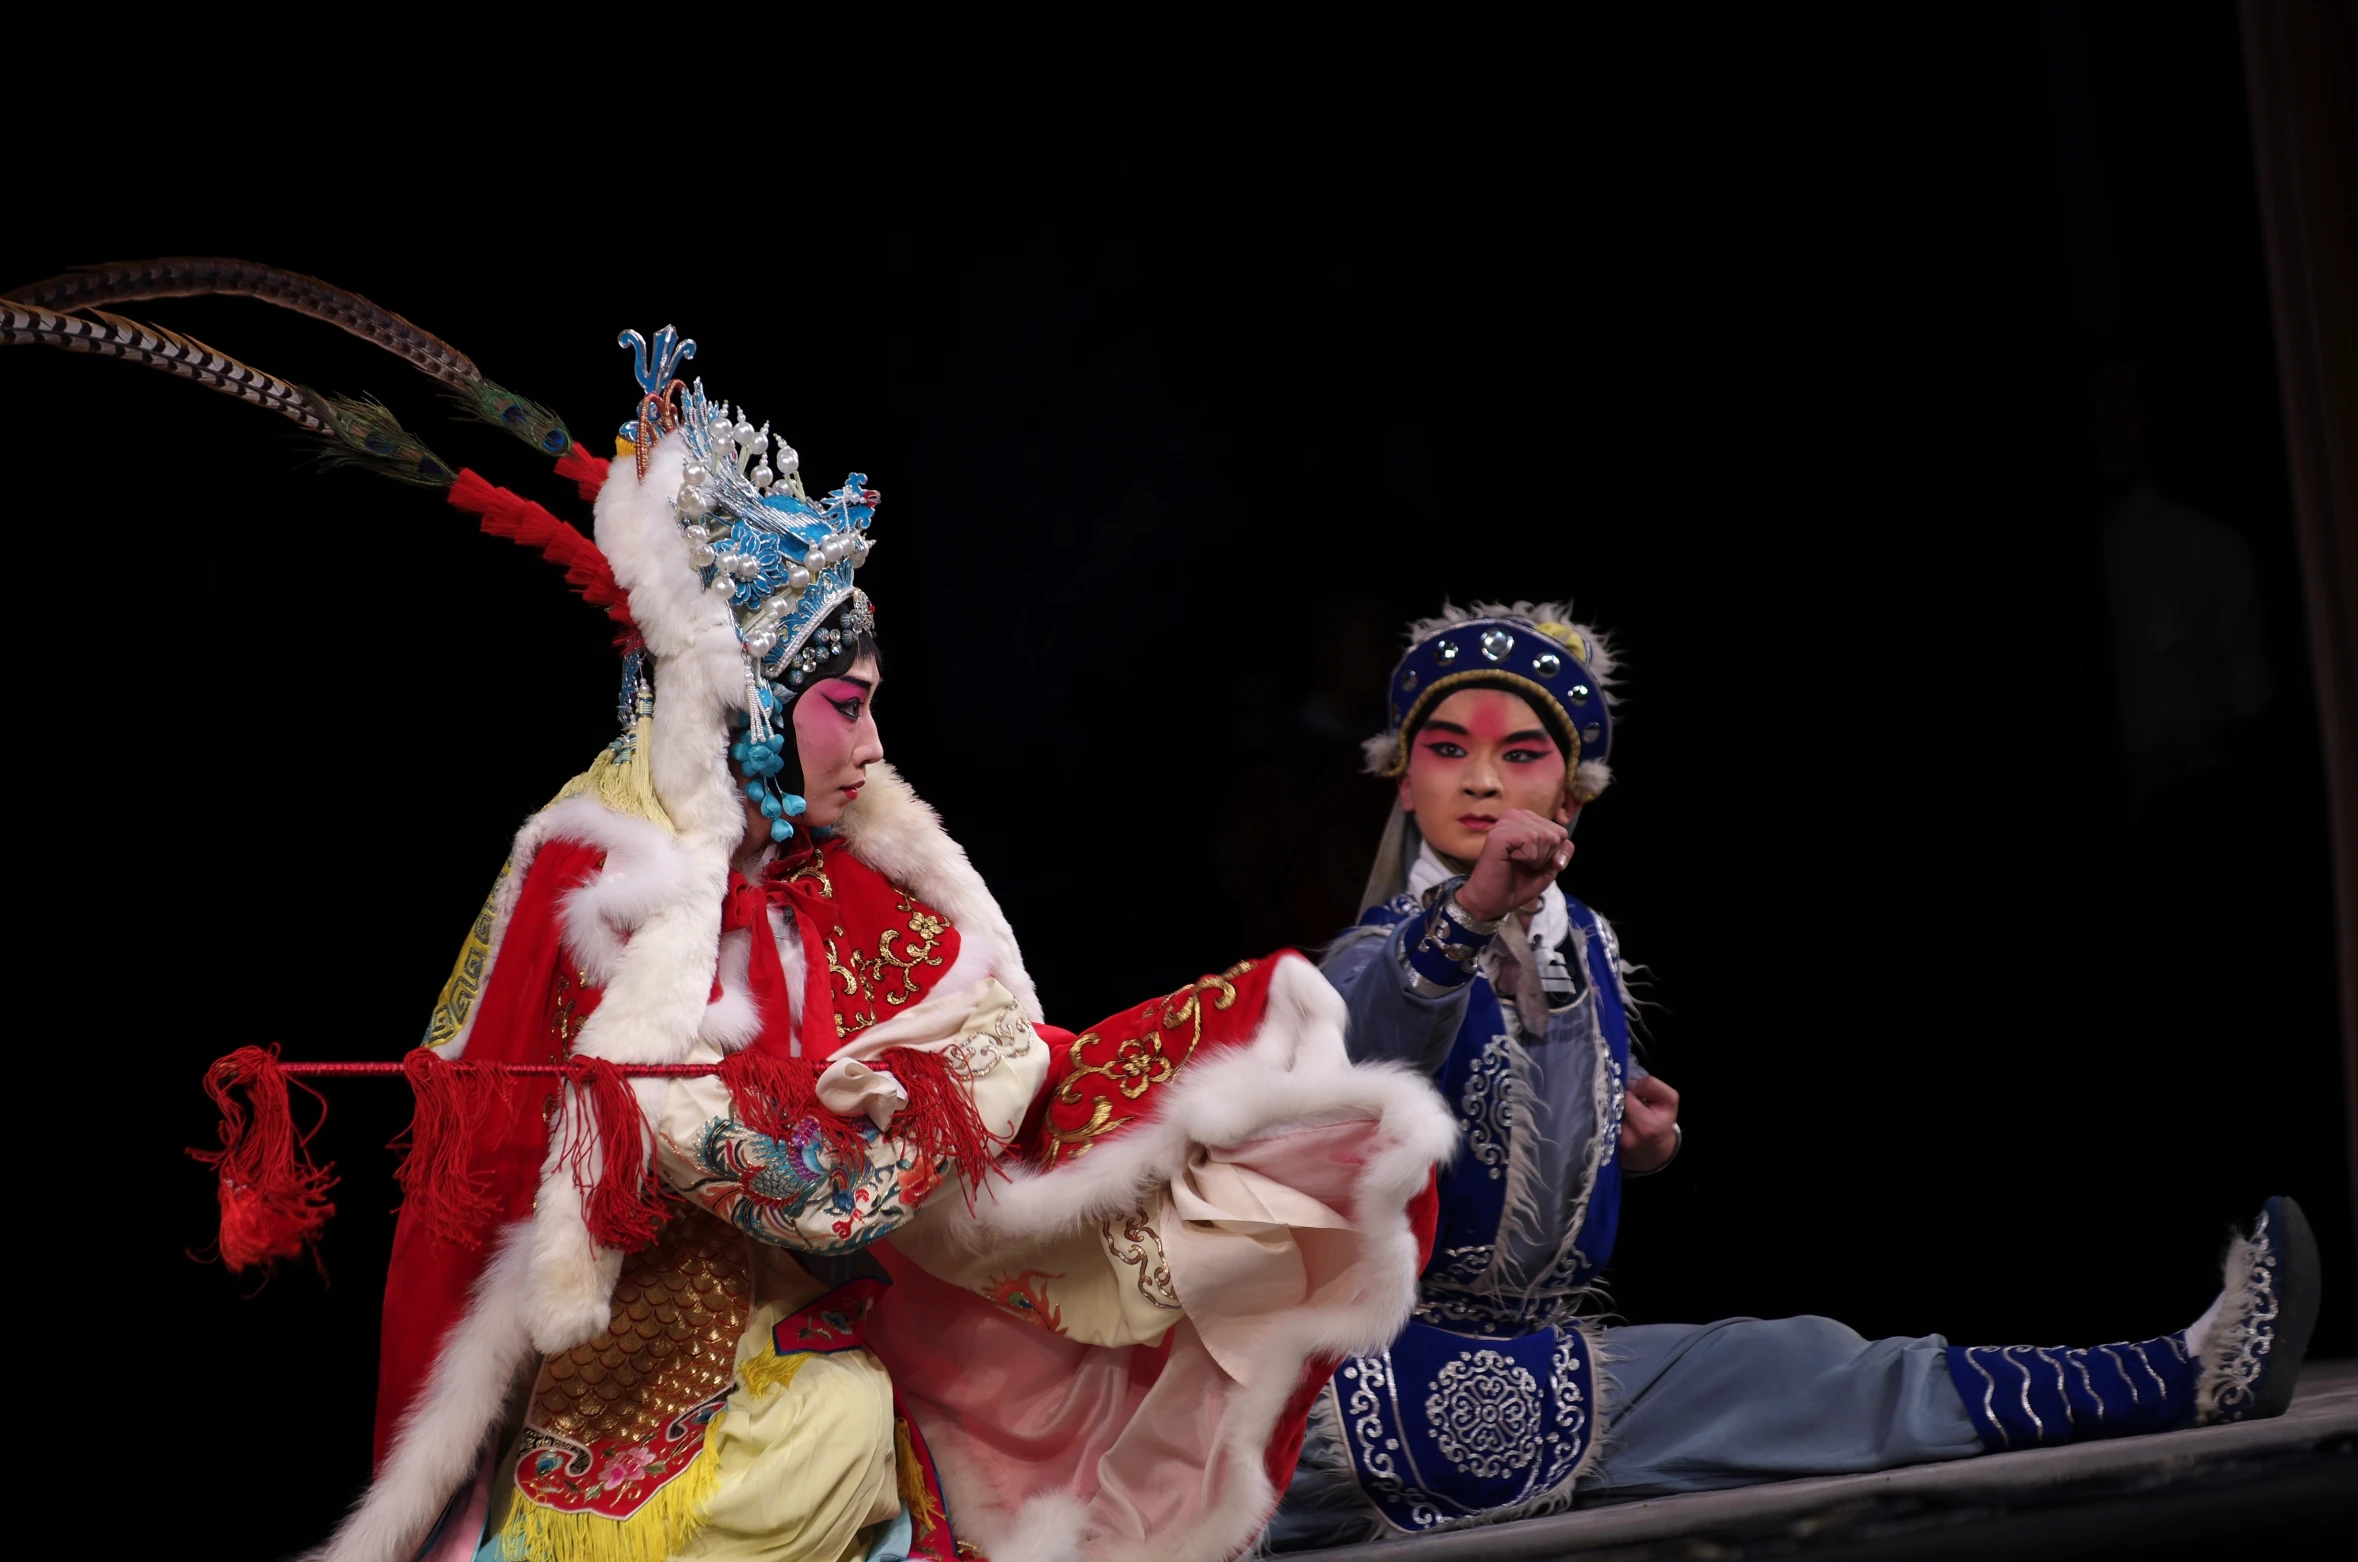 two men are dressed up and performing on stage